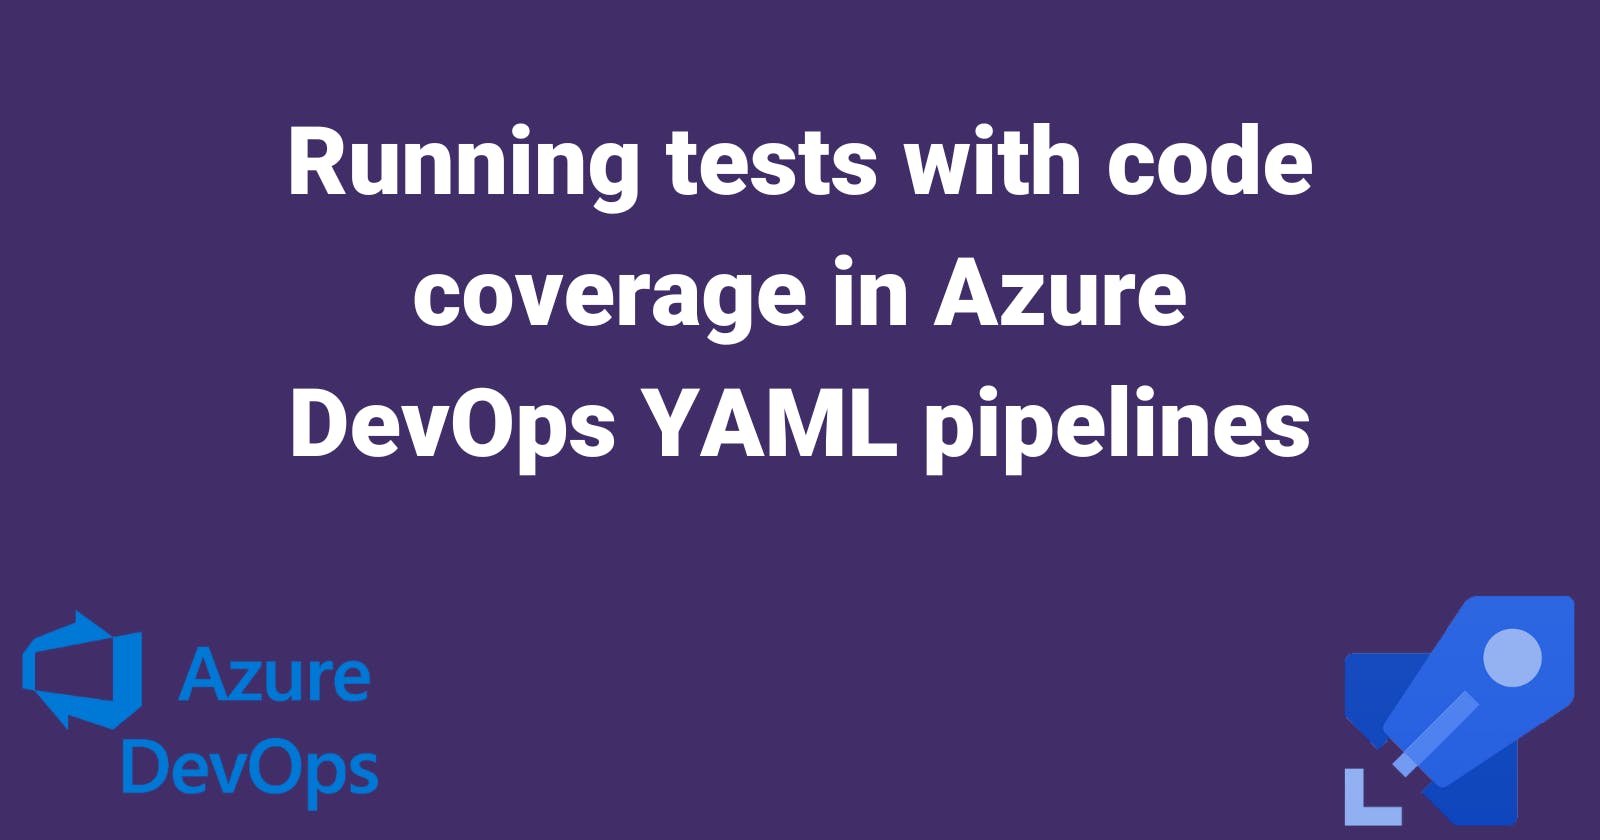 Running tests with code coverage in Azure DevOps YAML pipelines